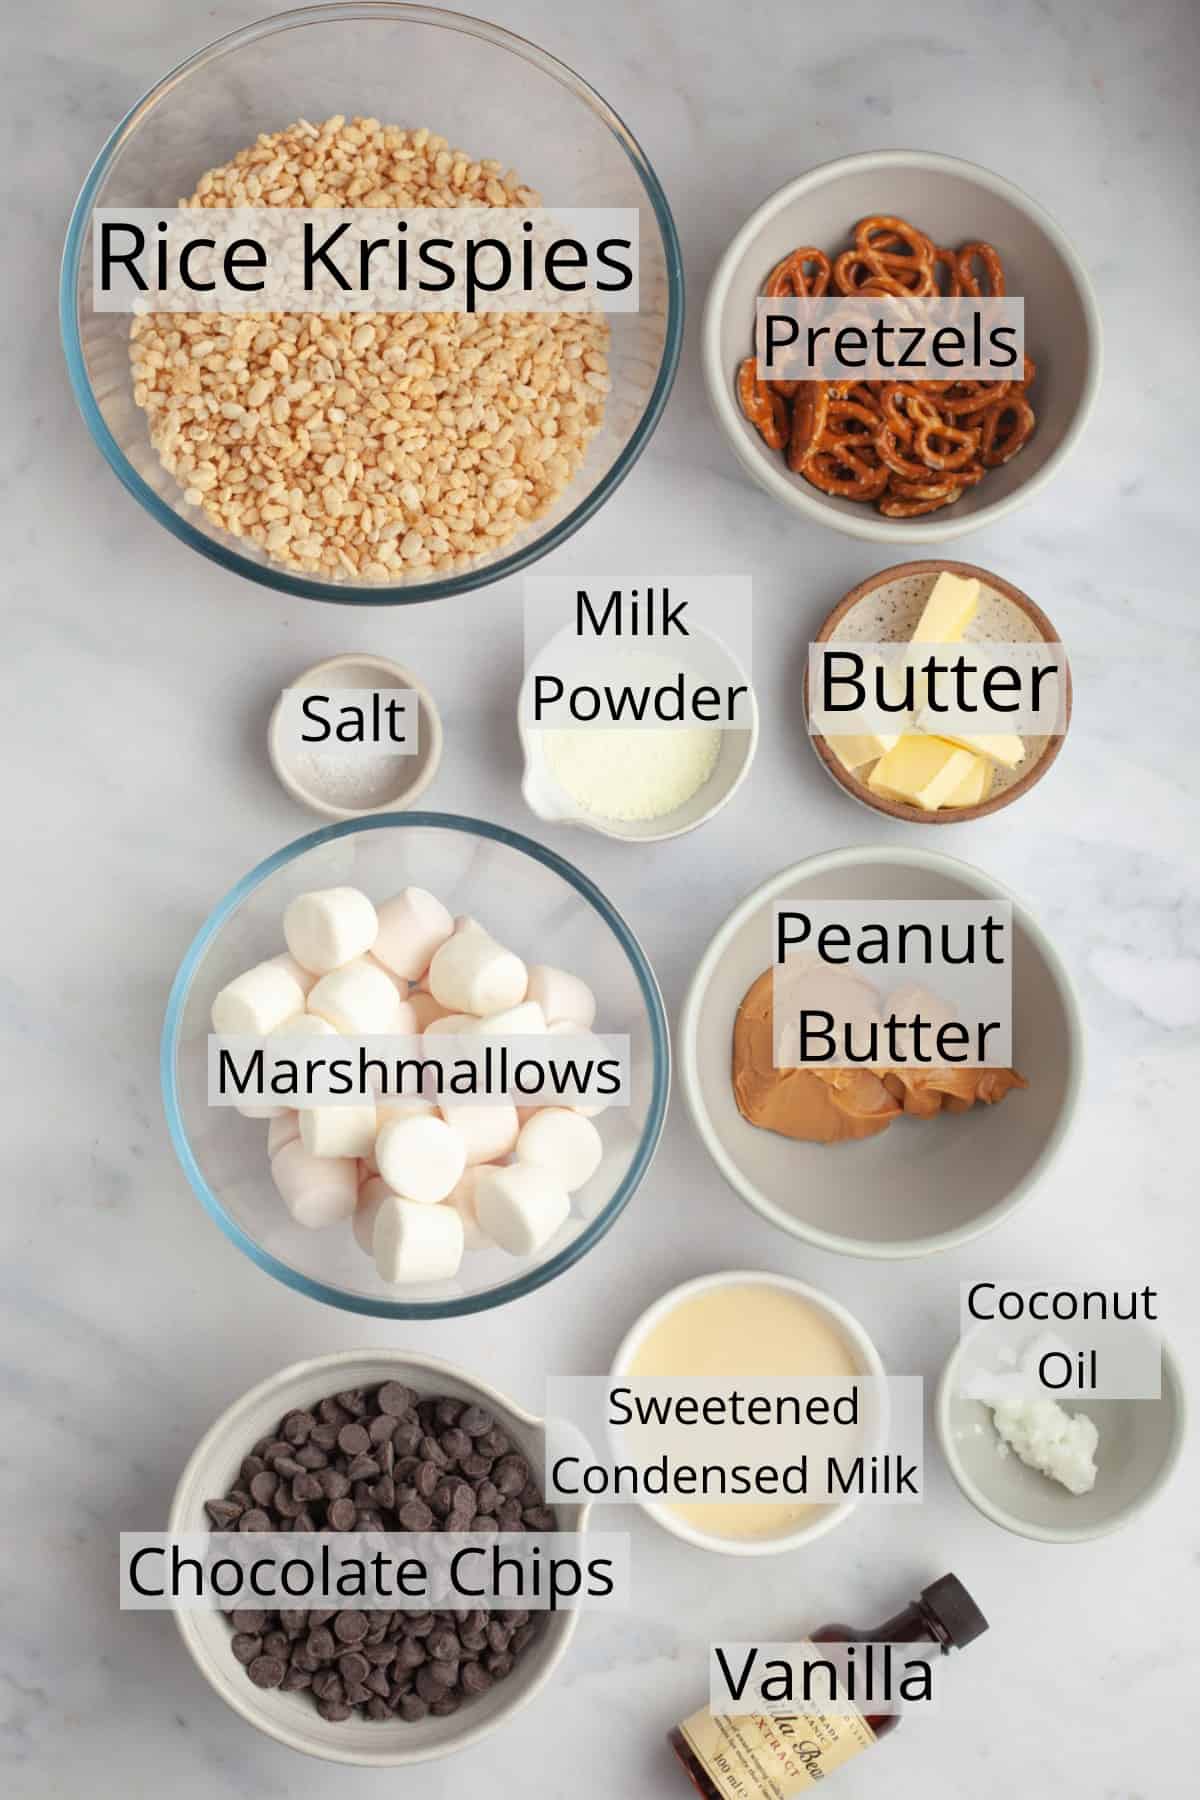 All the ingredients needed to make chocolate peanut butter rice krispie treats.